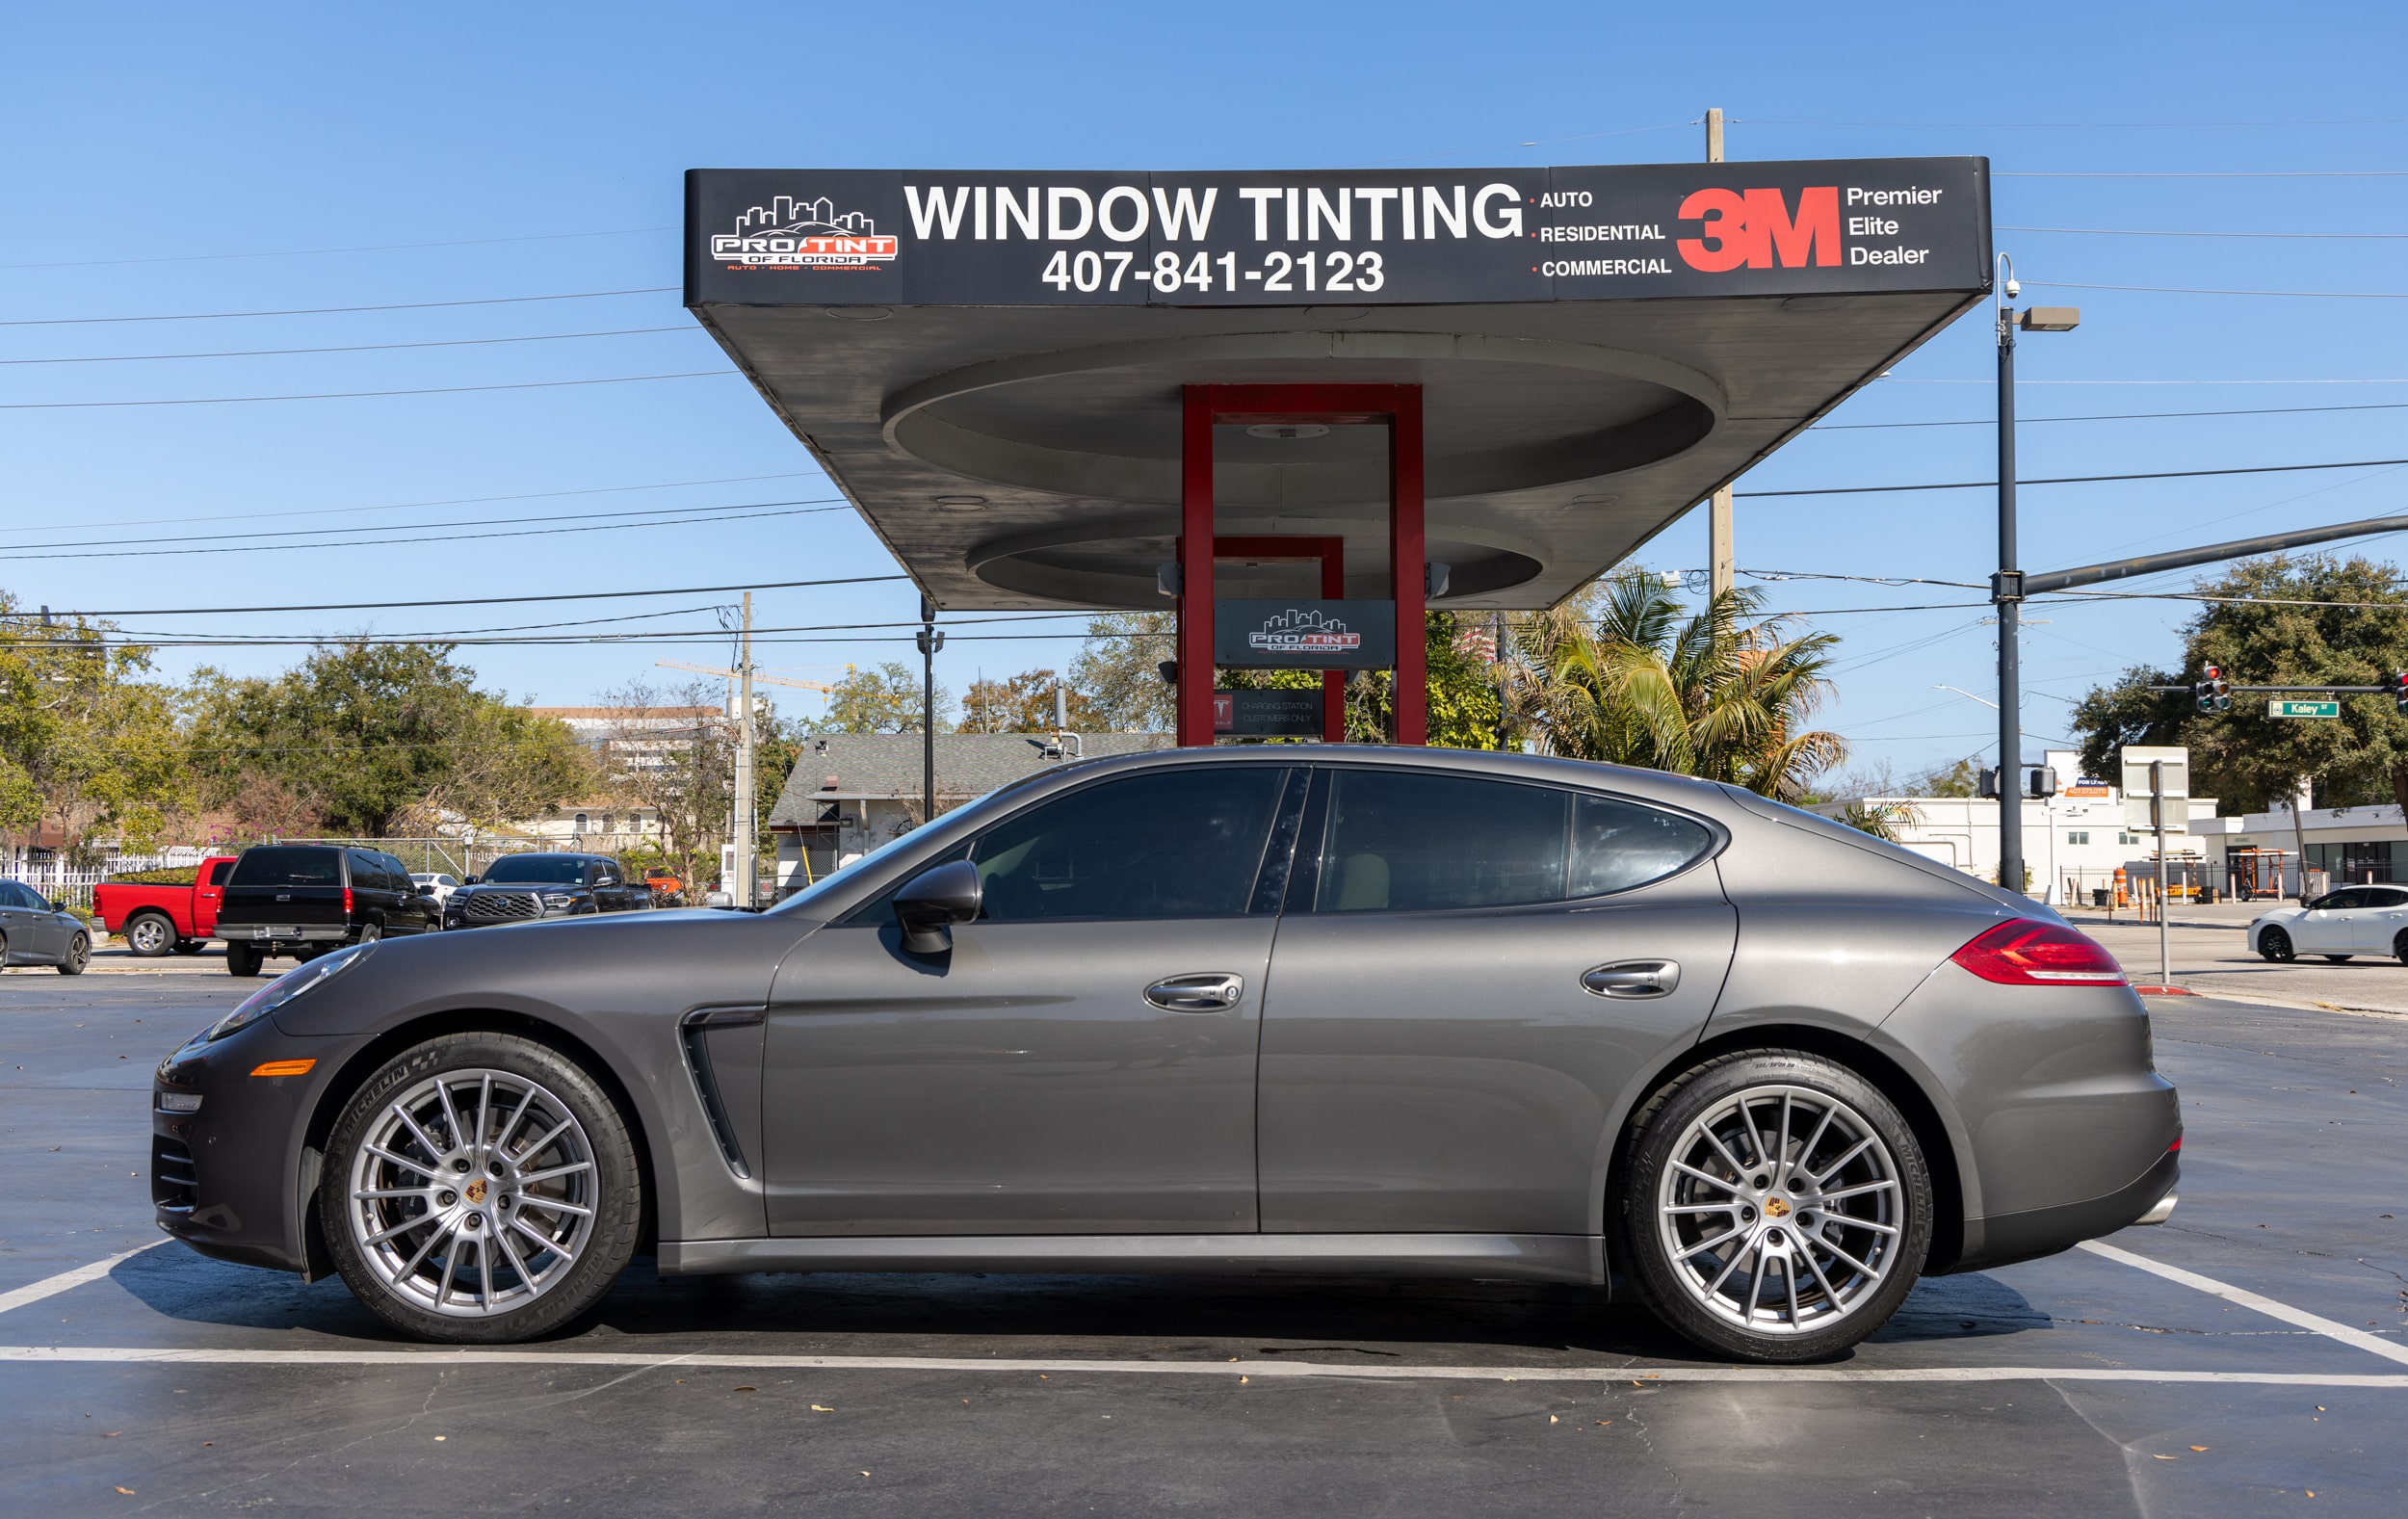 How to Care for Freshly Tinted Windows - Pro Tint of Florida